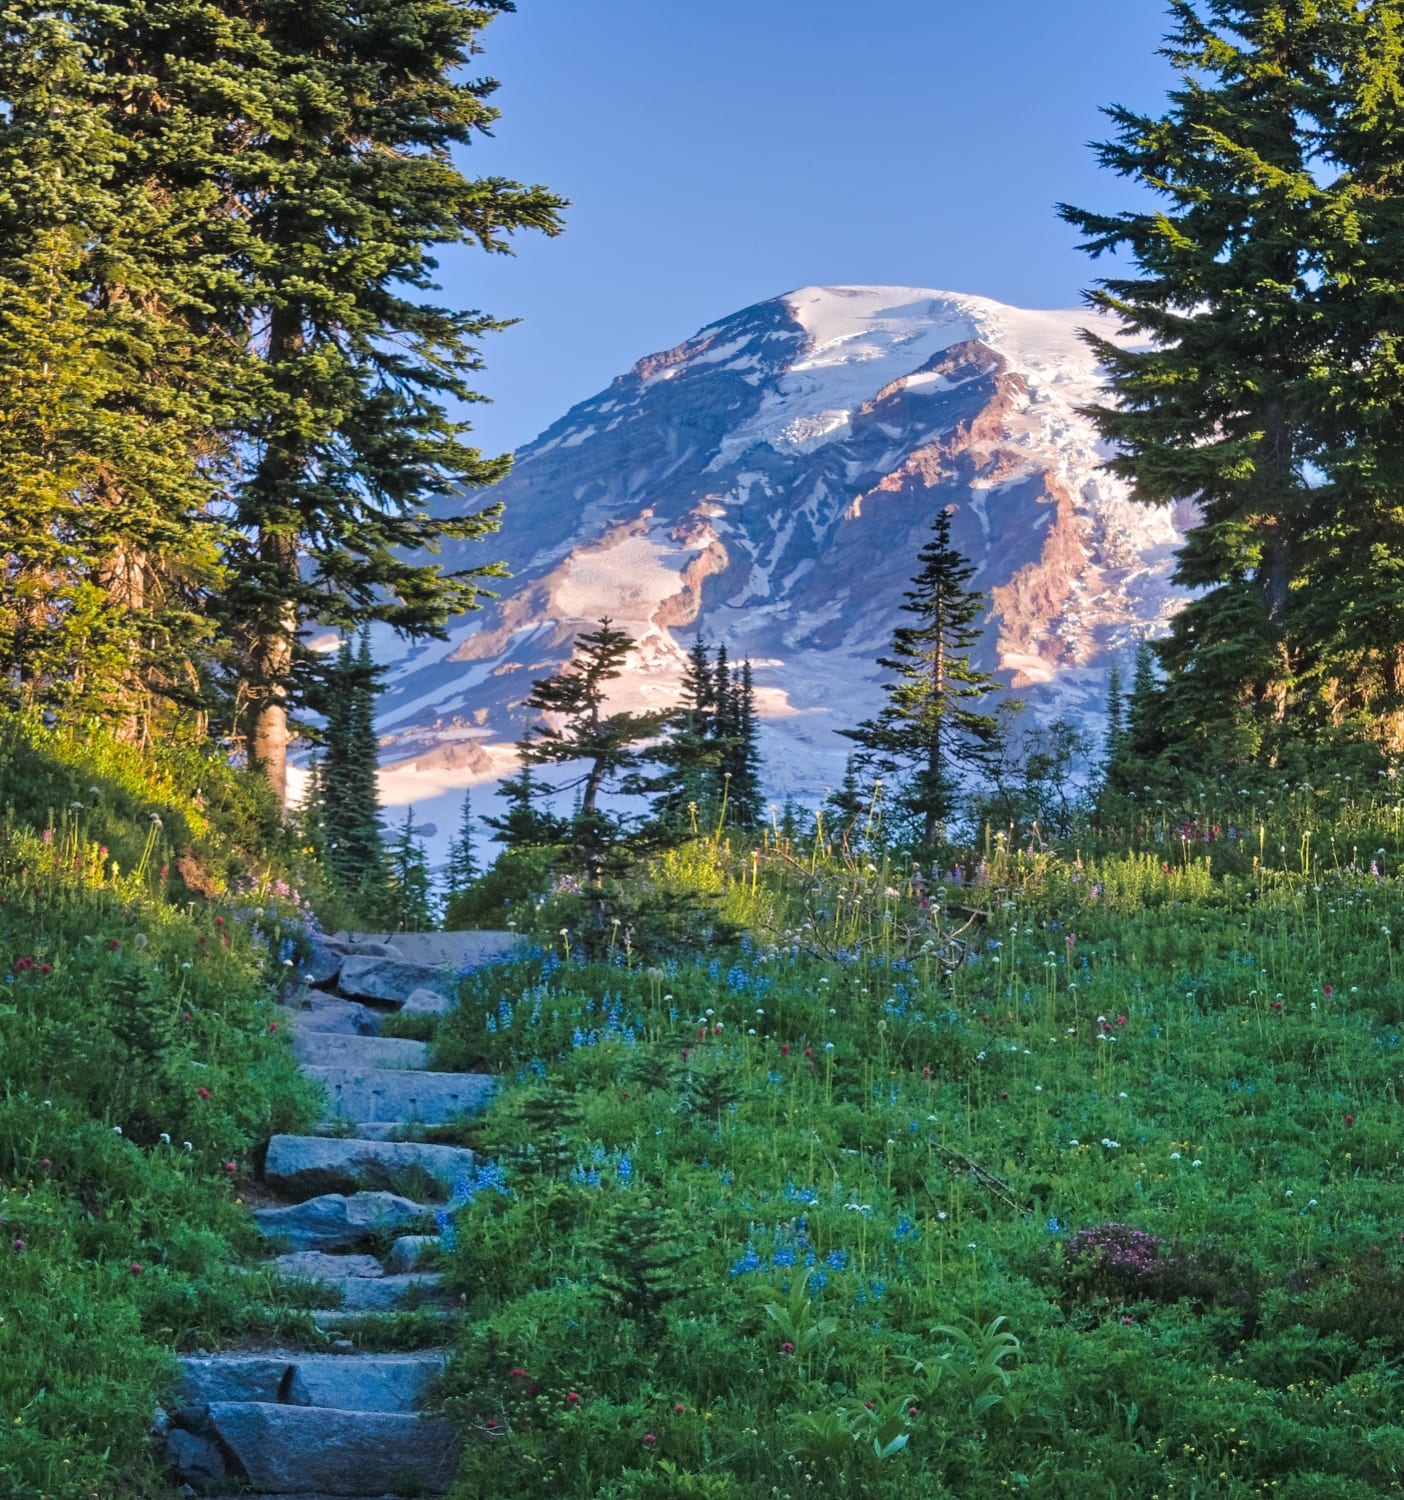 Mt Rainier peaks out above the trail on a summer sunrise hike. Hoping the national parks will be able to fully open to enjoy this next year.